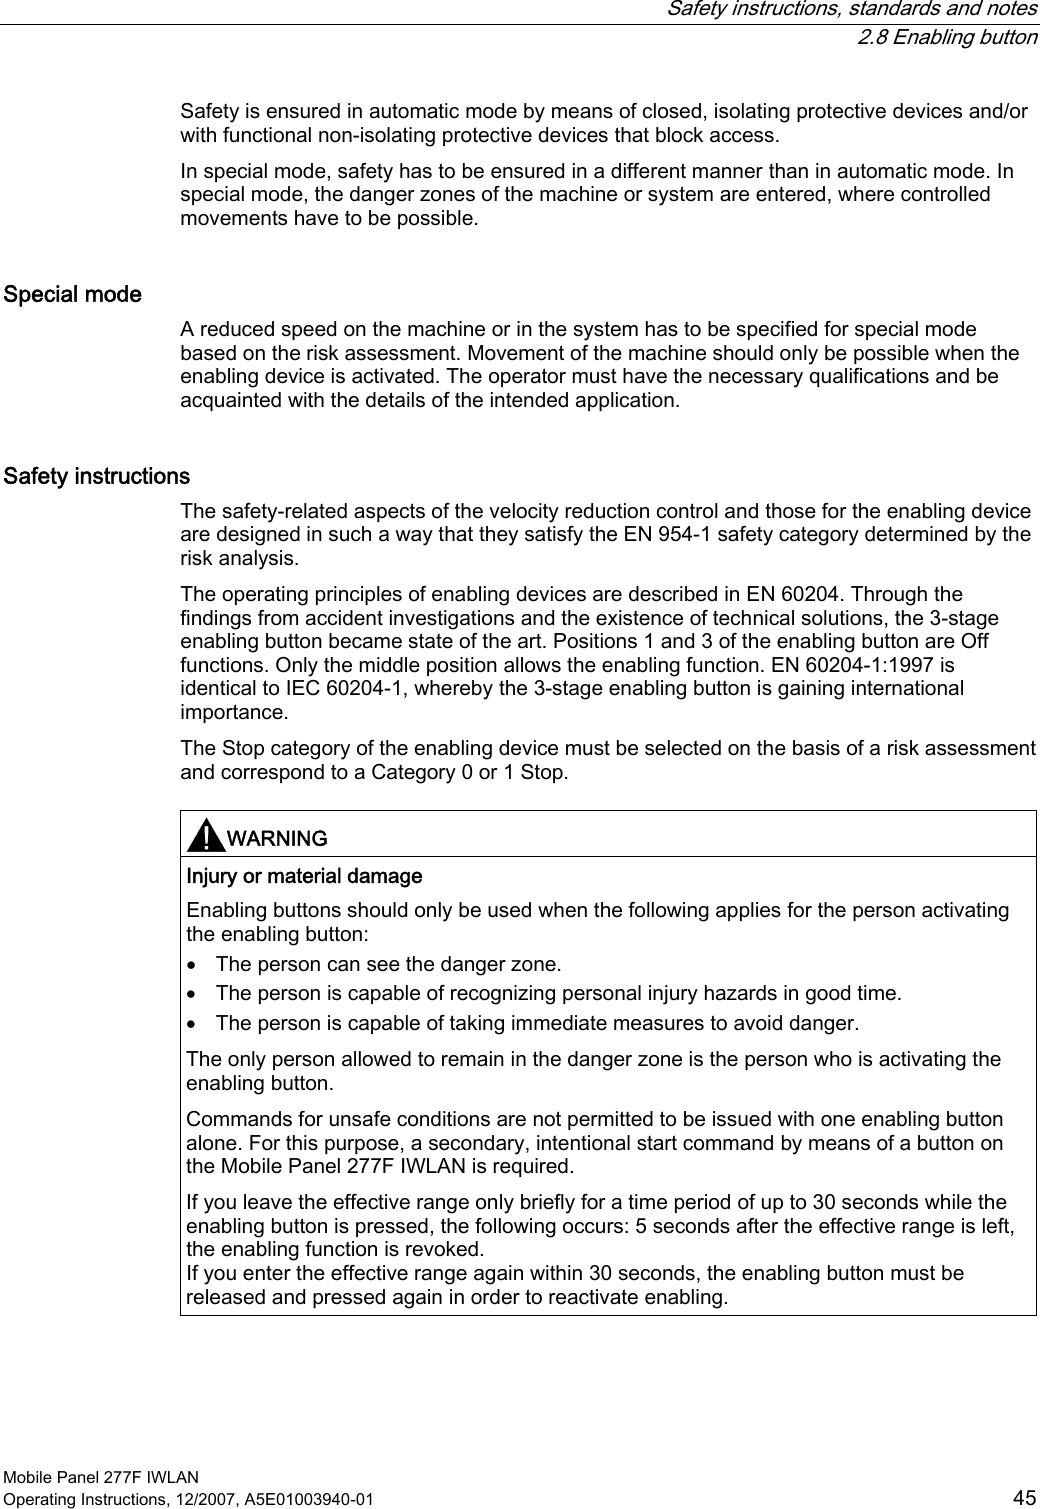   Safety instructions, standards and notes  2.8 Enabling button Mobile Panel 277F IWLAN Operating Instructions, 12/2007, A5E01003940-01  45 Safety is ensured in automatic mode by means of closed, isolating protective devices and/or with functional non-isolating protective devices that block access. In special mode, safety has to be ensured in a different manner than in automatic mode. In special mode, the danger zones of the machine or system are entered, where controlled movements have to be possible. Special mode A reduced speed on the machine or in the system has to be specified for special mode based on the risk assessment. Movement of the machine should only be possible when the enabling device is activated. The operator must have the necessary qualifications and be acquainted with the details of the intended application. Safety instructions The safety-related aspects of the velocity reduction control and those for the enabling device are designed in such a way that they satisfy the EN 954-1 safety category determined by the risk analysis. The operating principles of enabling devices are described in EN 60204. Through the findings from accident investigations and the existence of technical solutions, the 3-stage enabling button became state of the art. Positions 1 and 3 of the enabling button are Off functions. Only the middle position allows the enabling function. EN 60204-1:1997 is identical to IEC 60204-1, whereby the 3-stage enabling button is gaining international importance. The Stop category of the enabling device must be selected on the basis of a risk assessment and correspond to a Category 0 or 1 Stop.   WARNING  Injury or material damage Enabling buttons should only be used when the following applies for the person activating the enabling button: • The person can see the danger zone. • The person is capable of recognizing personal injury hazards in good time. • The person is capable of taking immediate measures to avoid danger. The only person allowed to remain in the danger zone is the person who is activating the enabling button. Commands for unsafe conditions are not permitted to be issued with one enabling button alone. For this purpose, a secondary, intentional start command by means of a button on the Mobile Panel 277F IWLAN is required.  If you leave the effective range only briefly for a time period of up to 30 seconds while the enabling button is pressed, the following occurs: 5 seconds after the effective range is left, the enabling function is revoked. If you enter the effective range again within 30 seconds, the enabling button must be released and pressed again in order to reactivate enabling.  